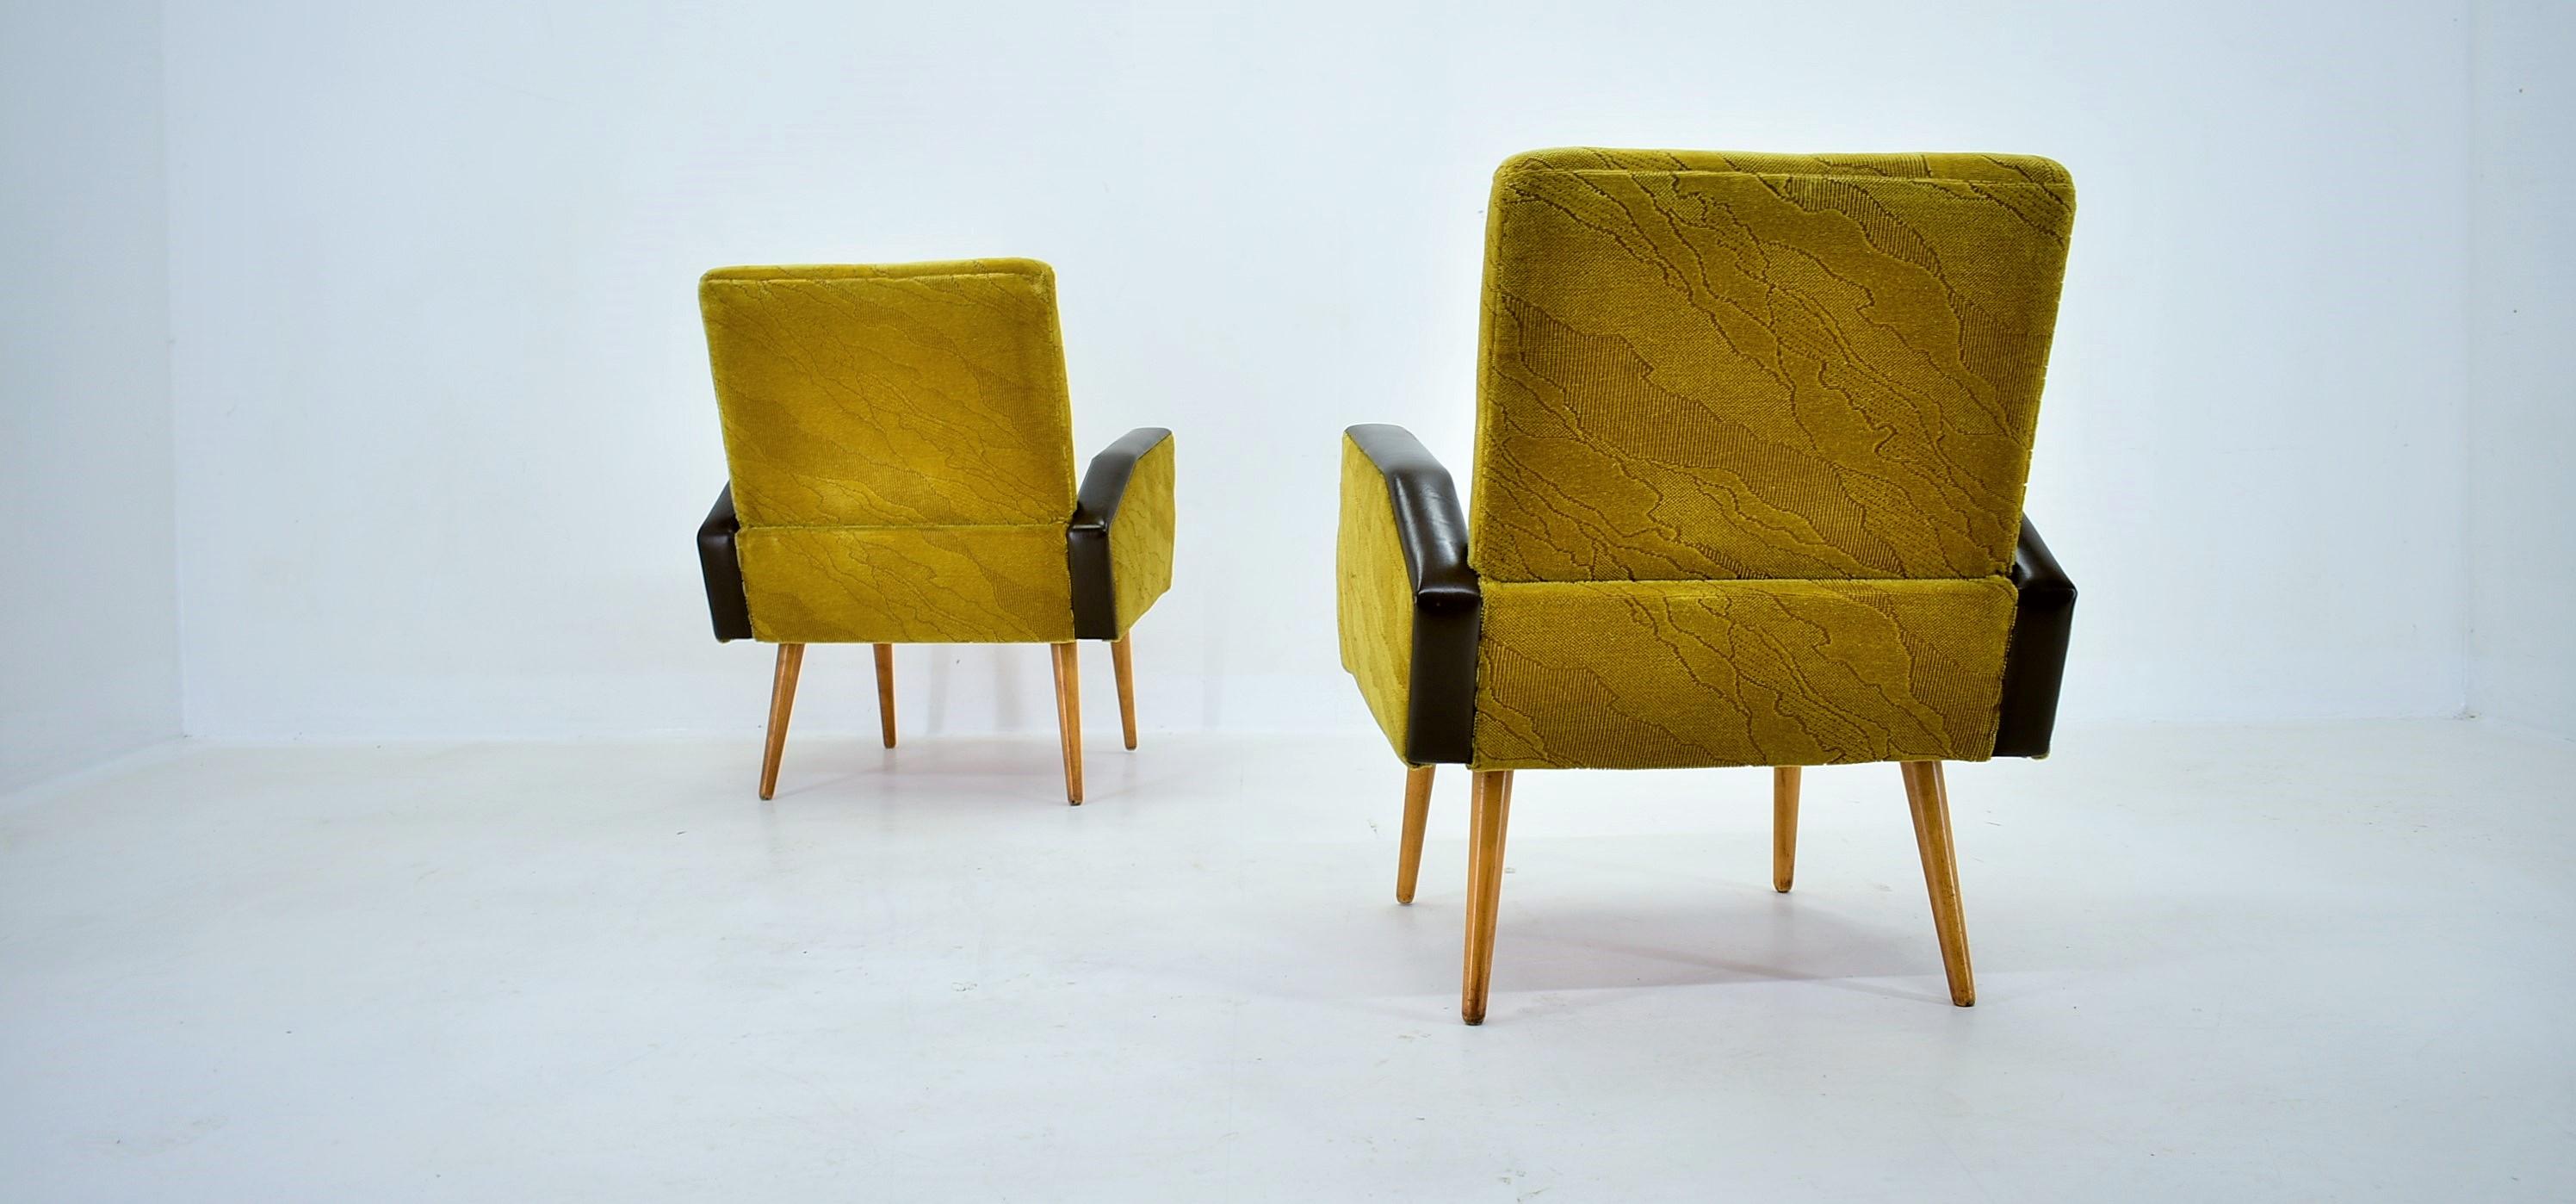 Midcentury Leather Armchairs Designed by Miroslav Navrátil, 1970s For Sale 7